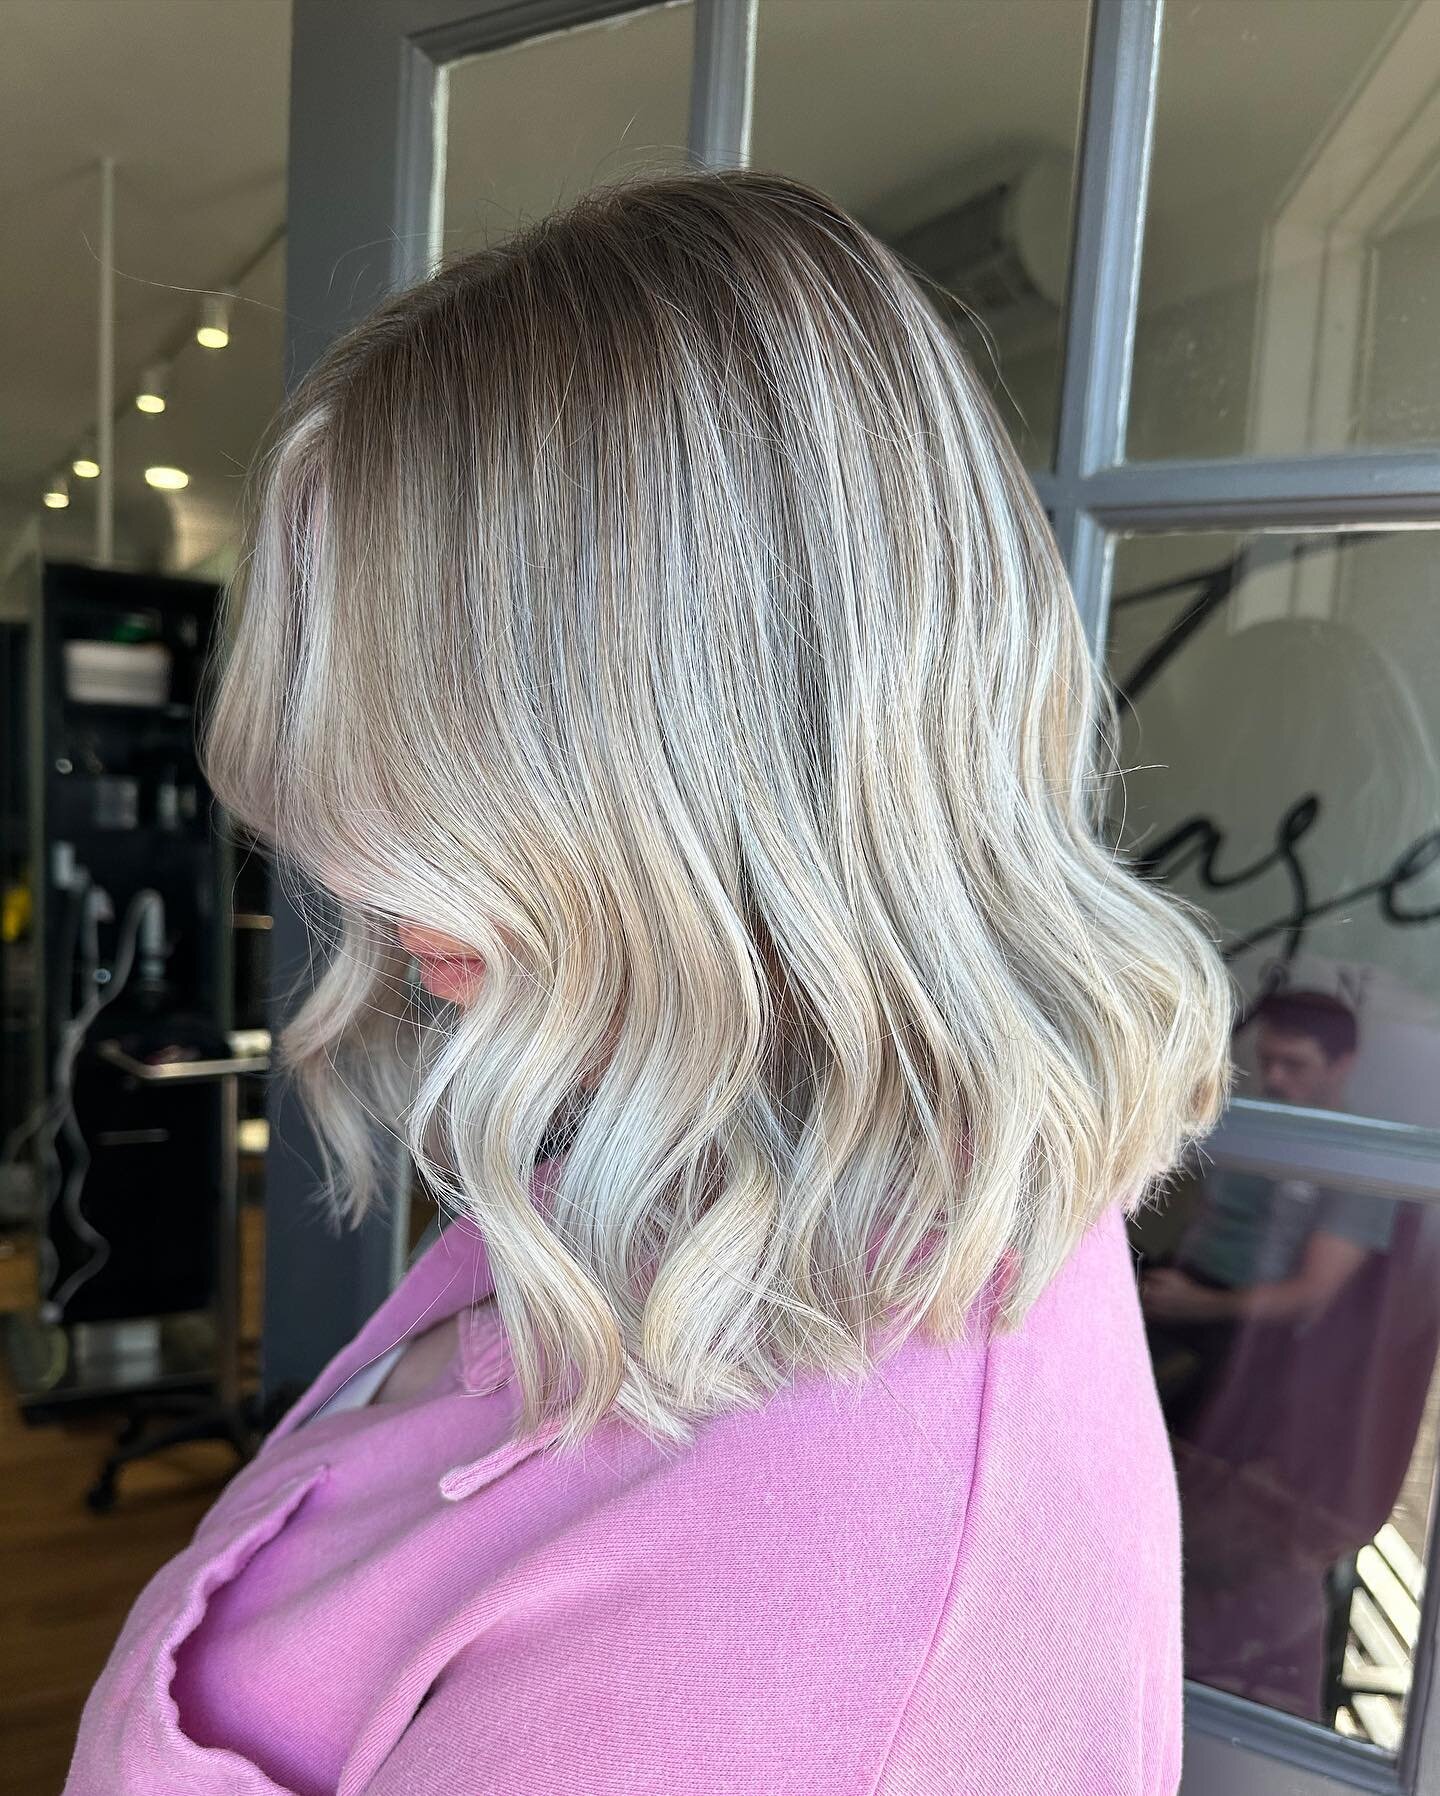 M e l t e d so perfectly 🤍🤎
-
By Kathryn @hairby_kathrynt 
-
TEXT TO BOOK 302-279-7876
-

#teasesalonde #delawaresalon #delawarehairstylist #delawarehair #delawarestylist #delawarehairsalon #delawaresalon #behindthechair #modernsalon #americansalon